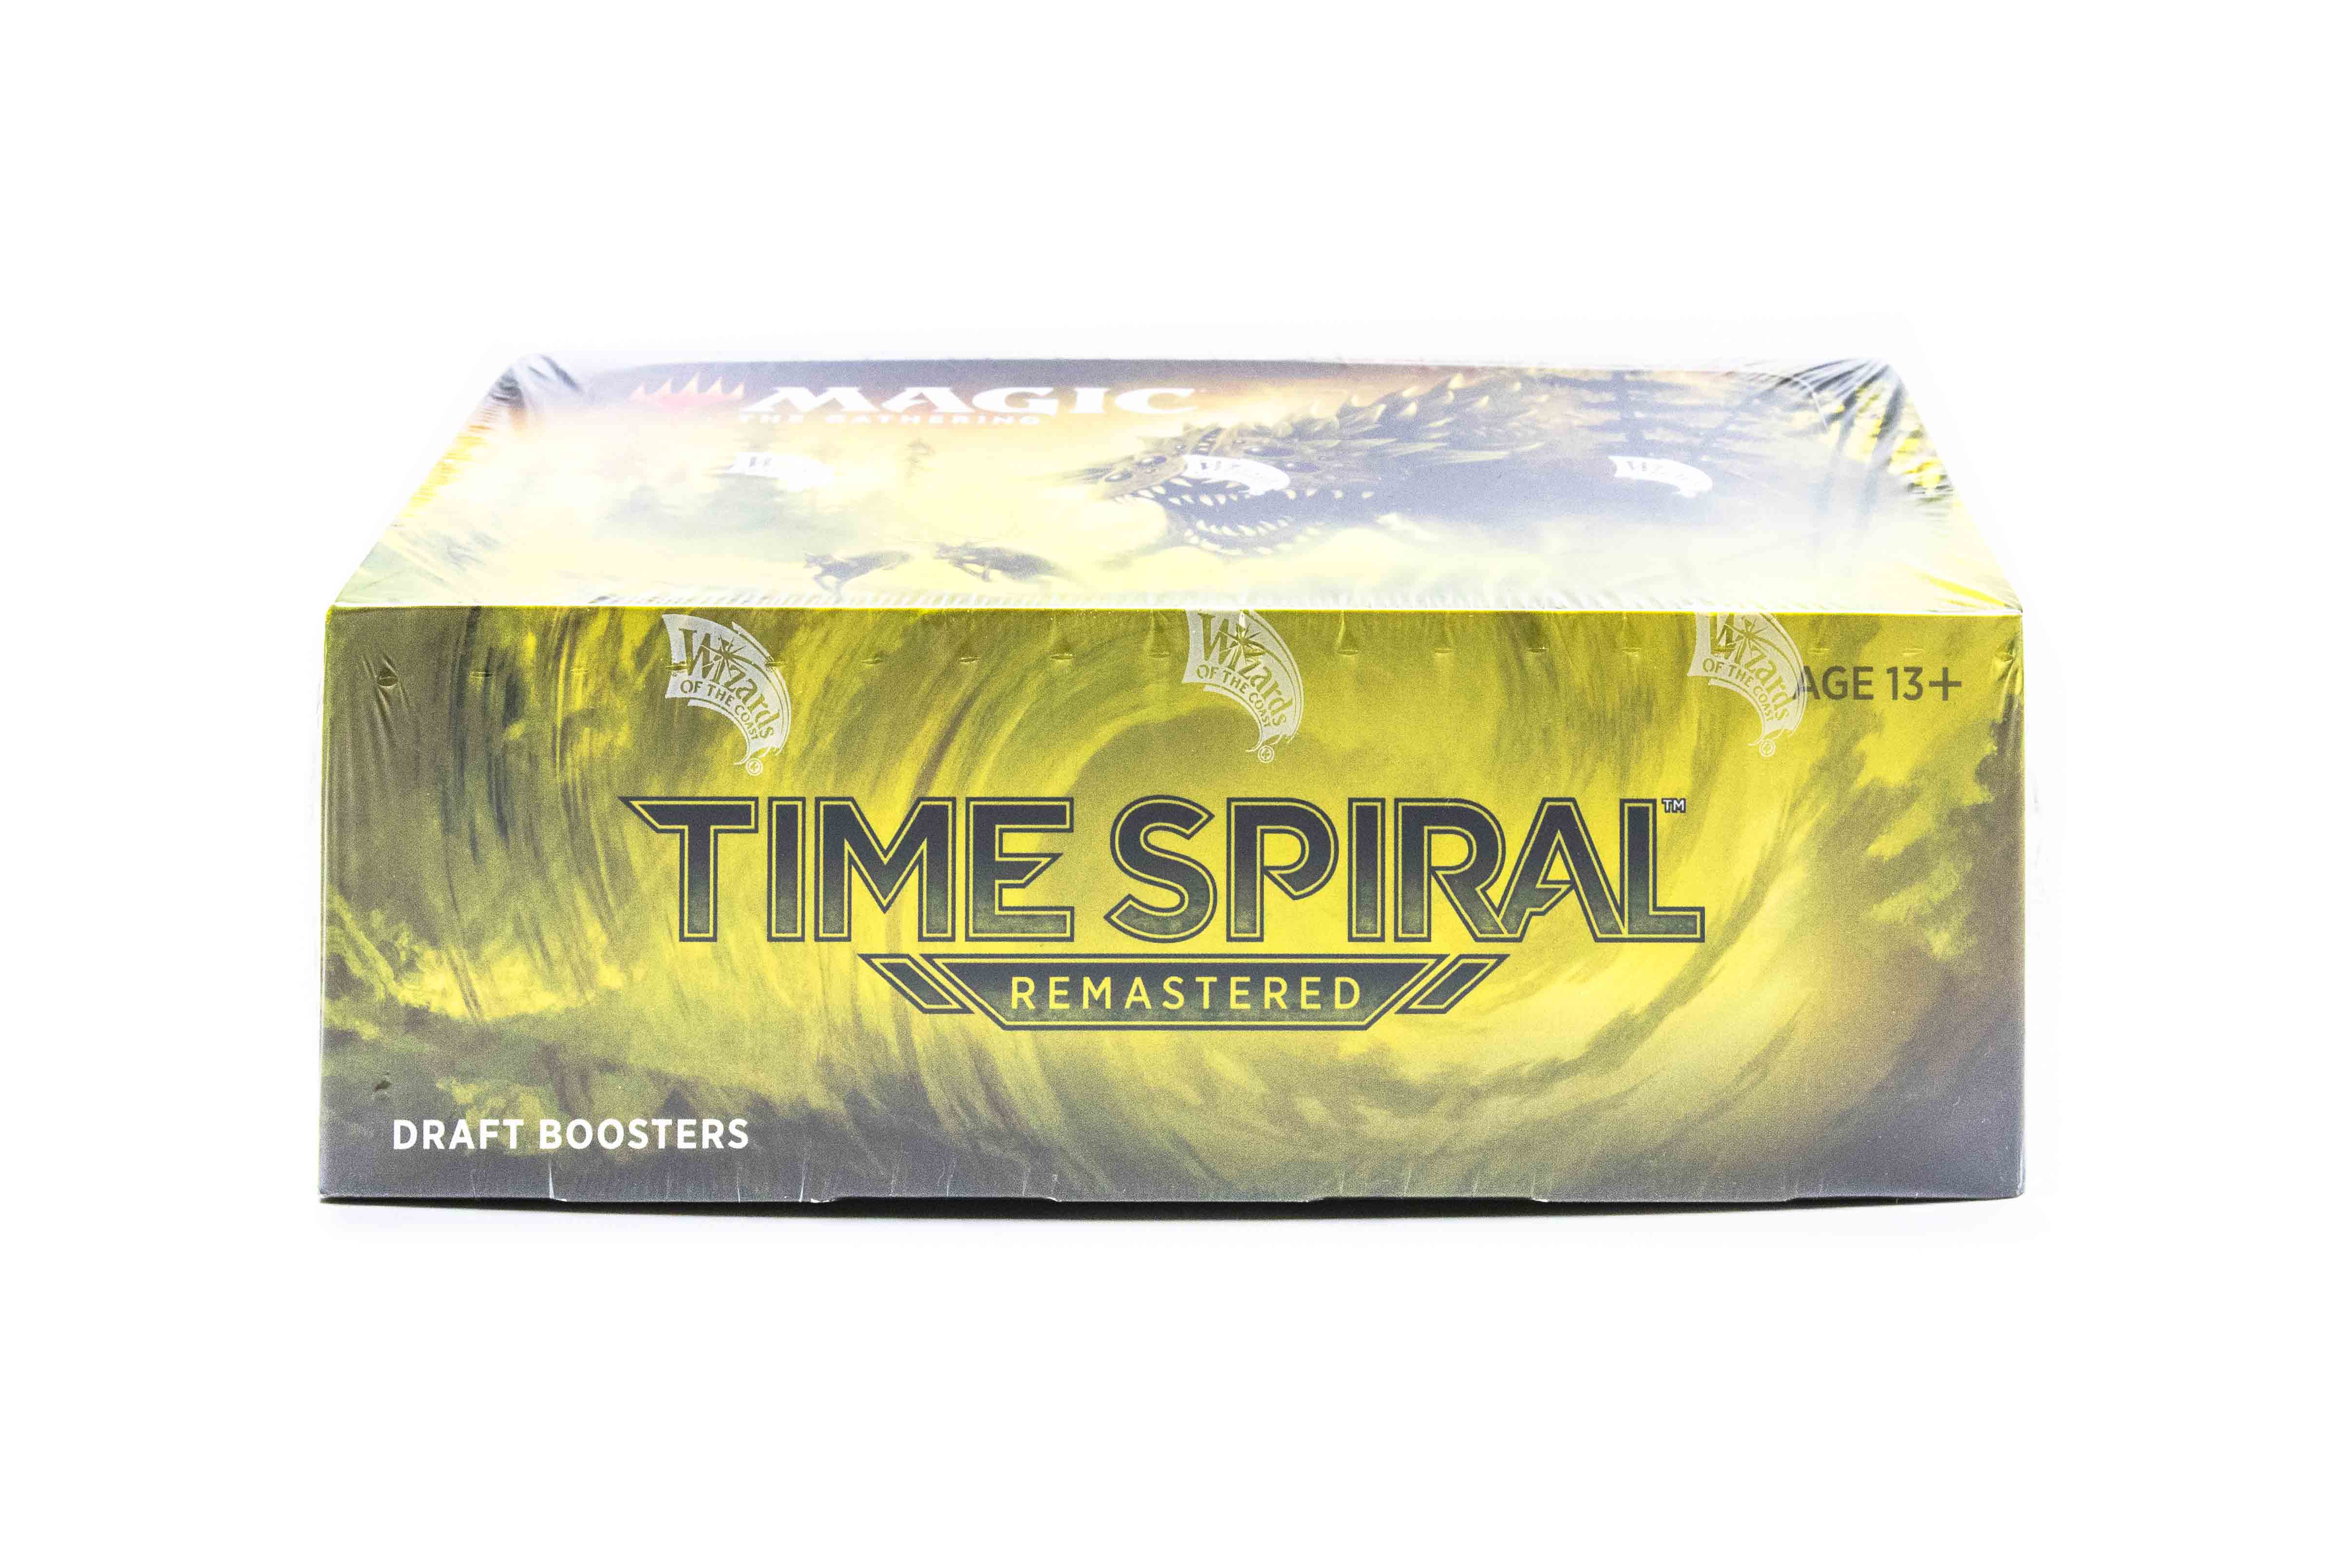 Time Spiral Remastered Draft Booster Box 